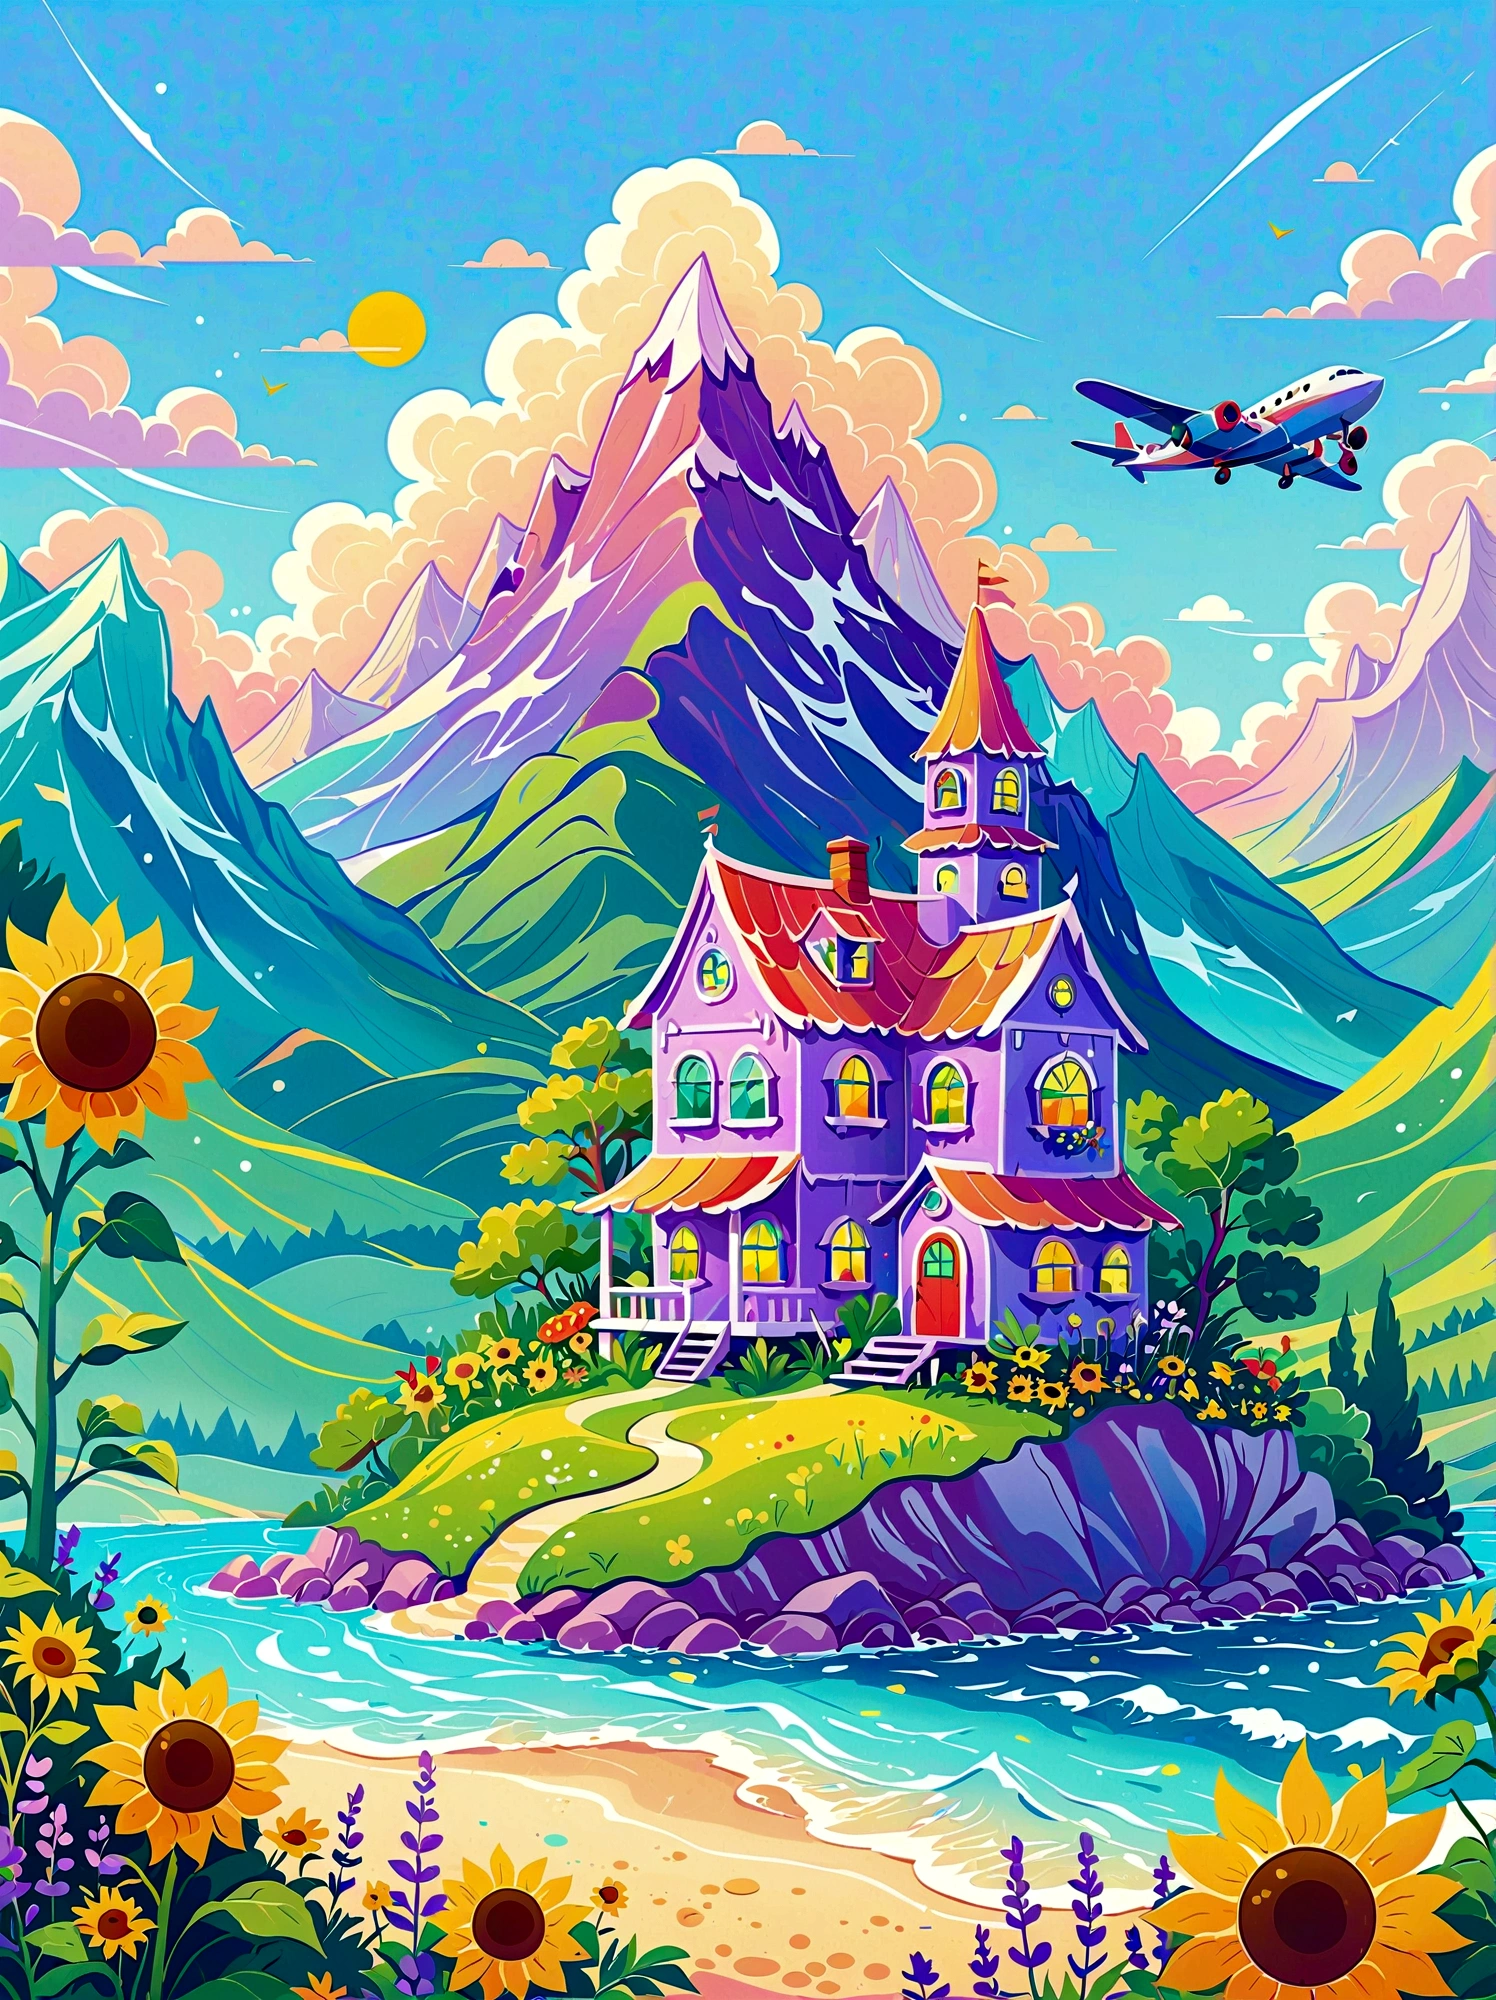 1pzsj1, (flat, user interface vector style), (world in a bottle), heavenly colors, colorful fantasy candy house, fairy tale world, spring, seaside, rios, tree house, sunflower field, lavender, mountains, peaks, big trees, (simple illustration), (smooth line art: 1.2), (minimalism), white background, (graphic design aesthetics), (flat illustration), (Plane illustration)